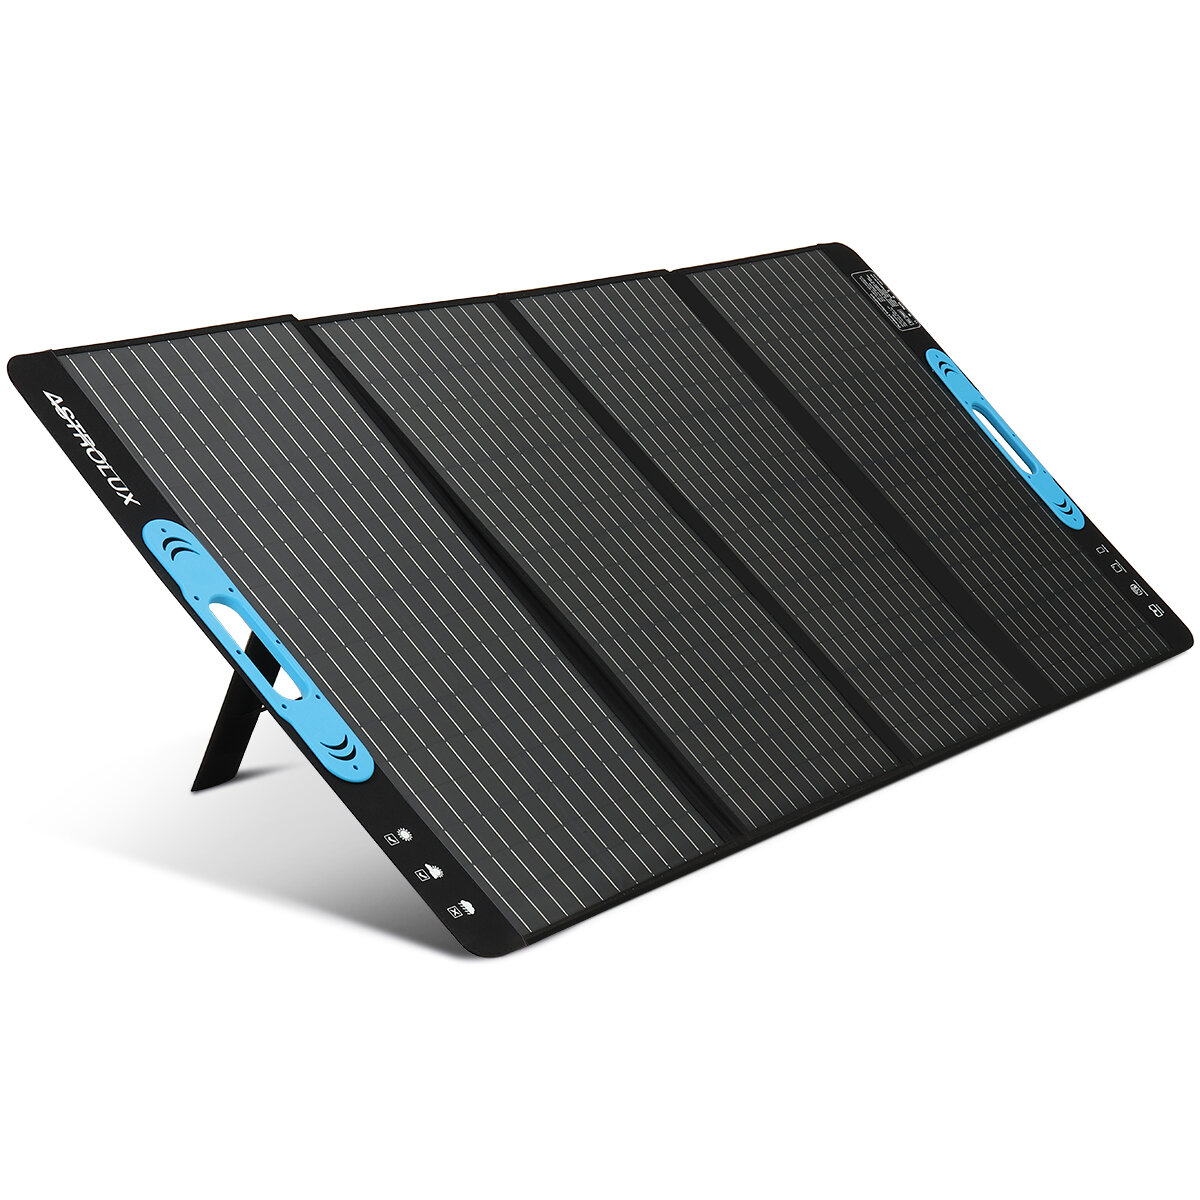 Astrolux® FSP200 18V 200W Foldable Solar Panel Portable Solar Battery Charger With USB DC Multi-Contact 4 Multi-Output for Power Station Tablet Phones Flashlight Camping Van RV